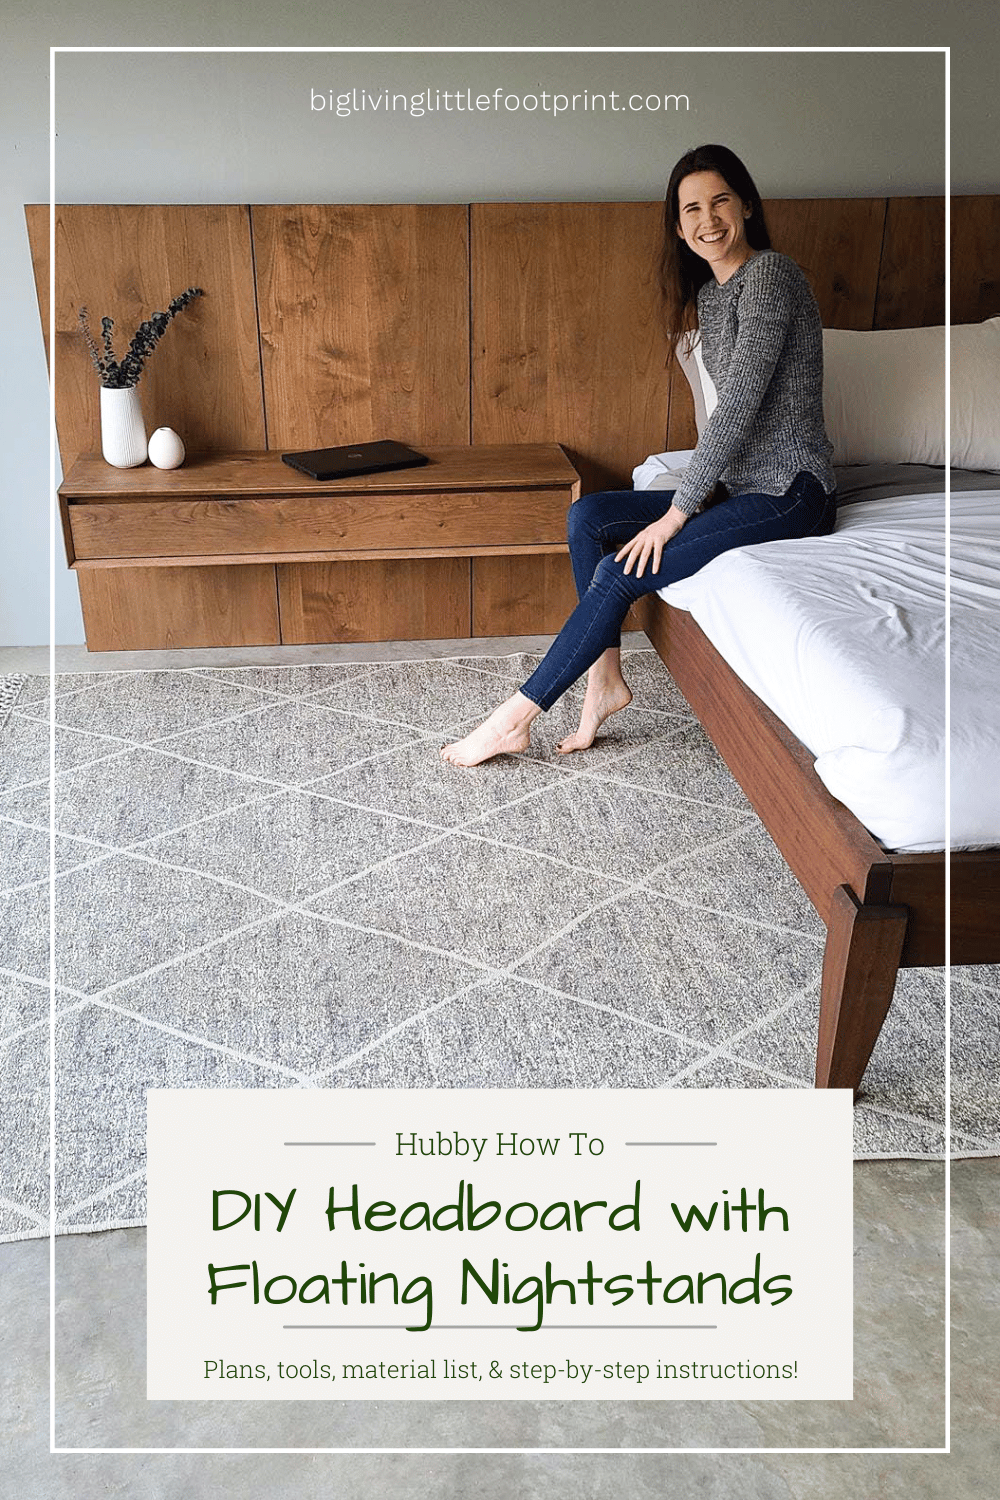 Hubby How To – DIY Modern Headboard With Floating Nightstands